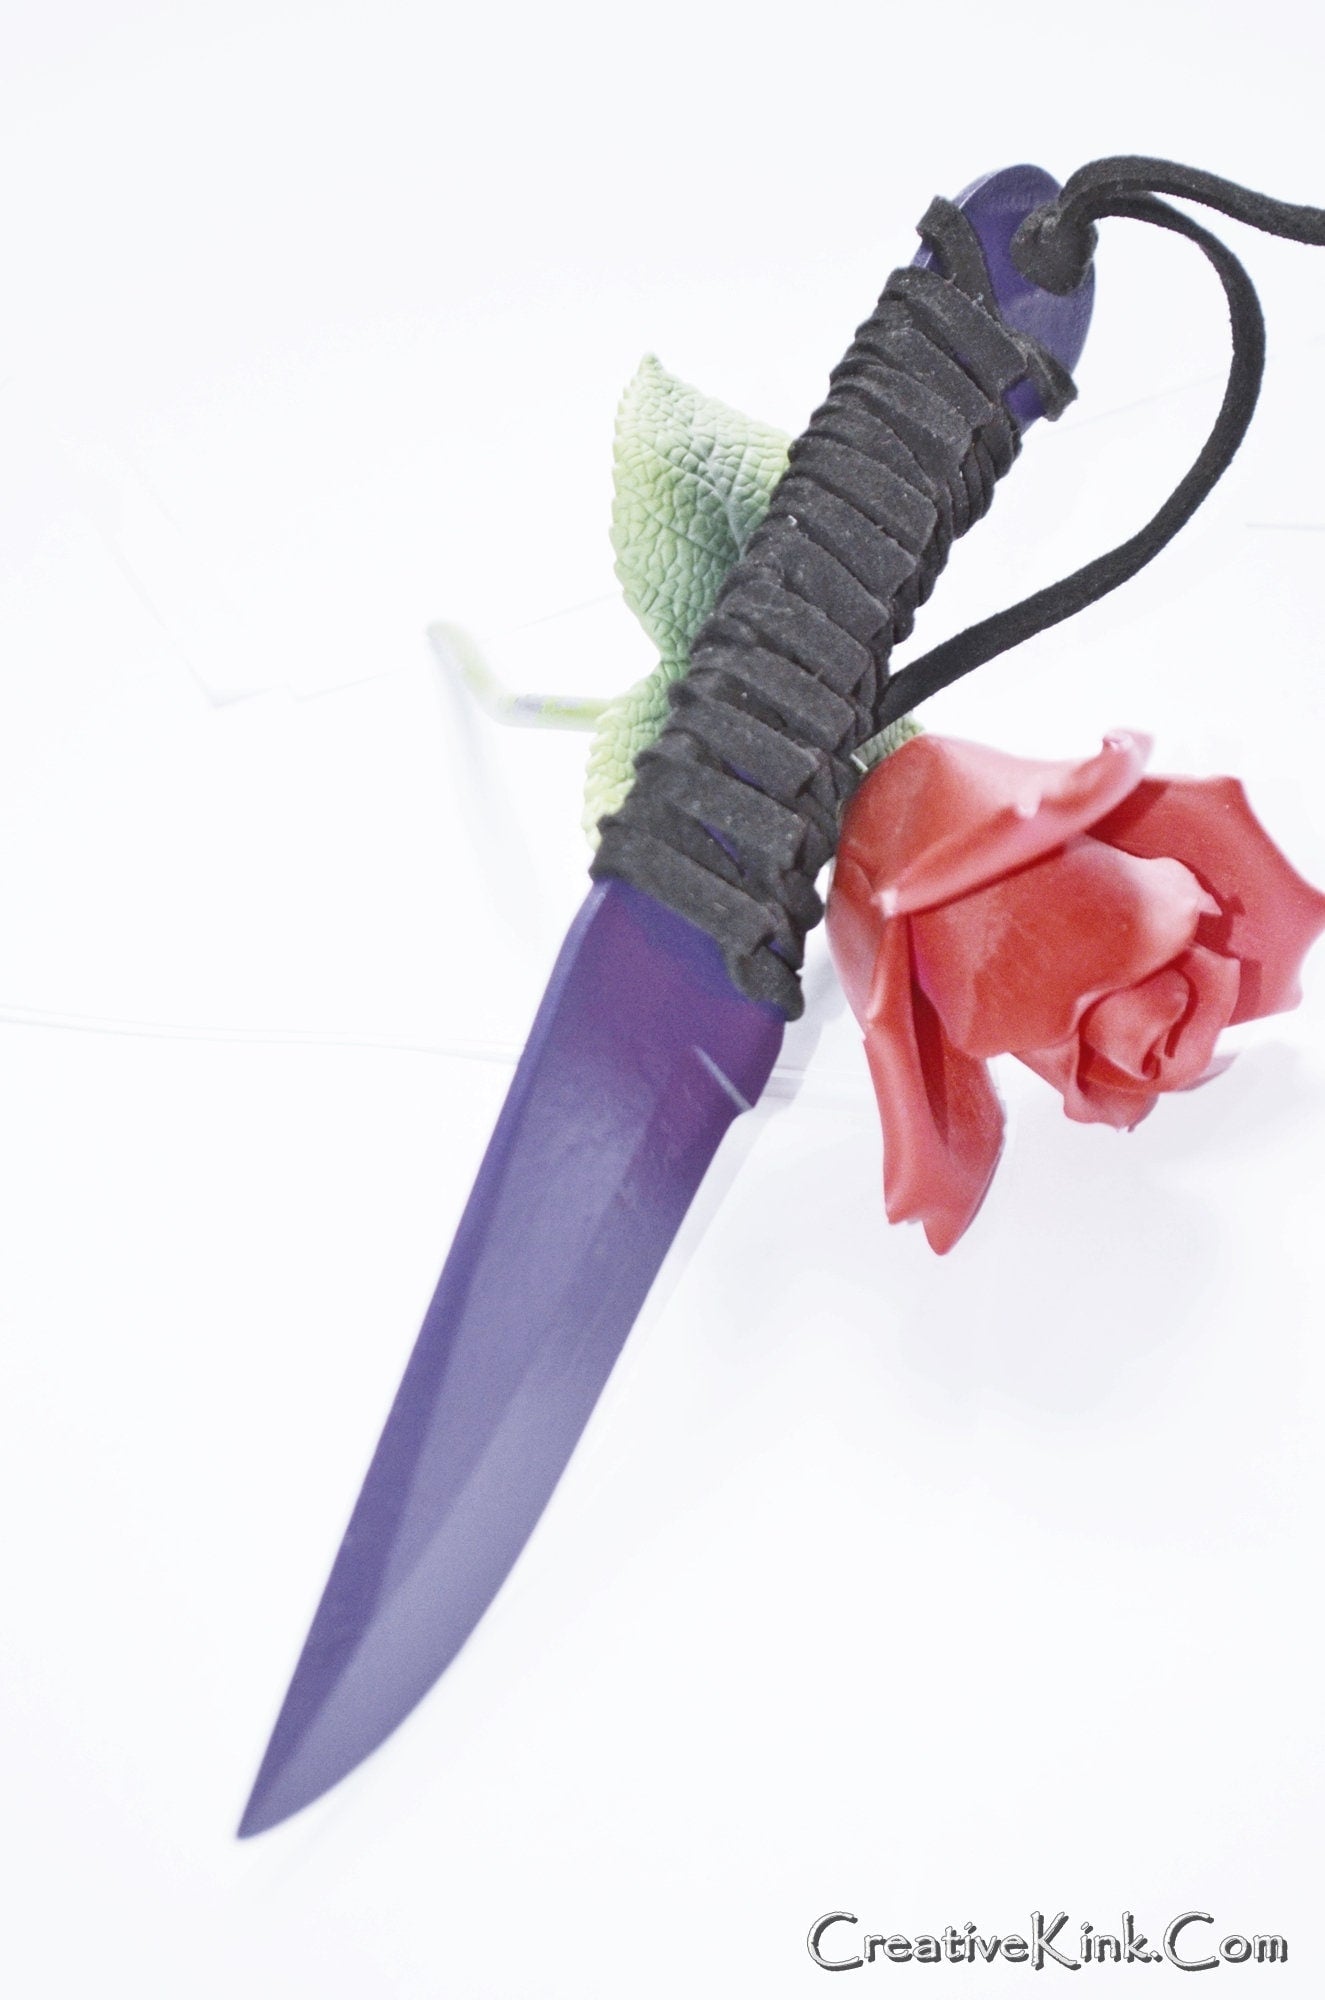 Shadow on Steel - Violet and Leather BDSM Play Blade Knife